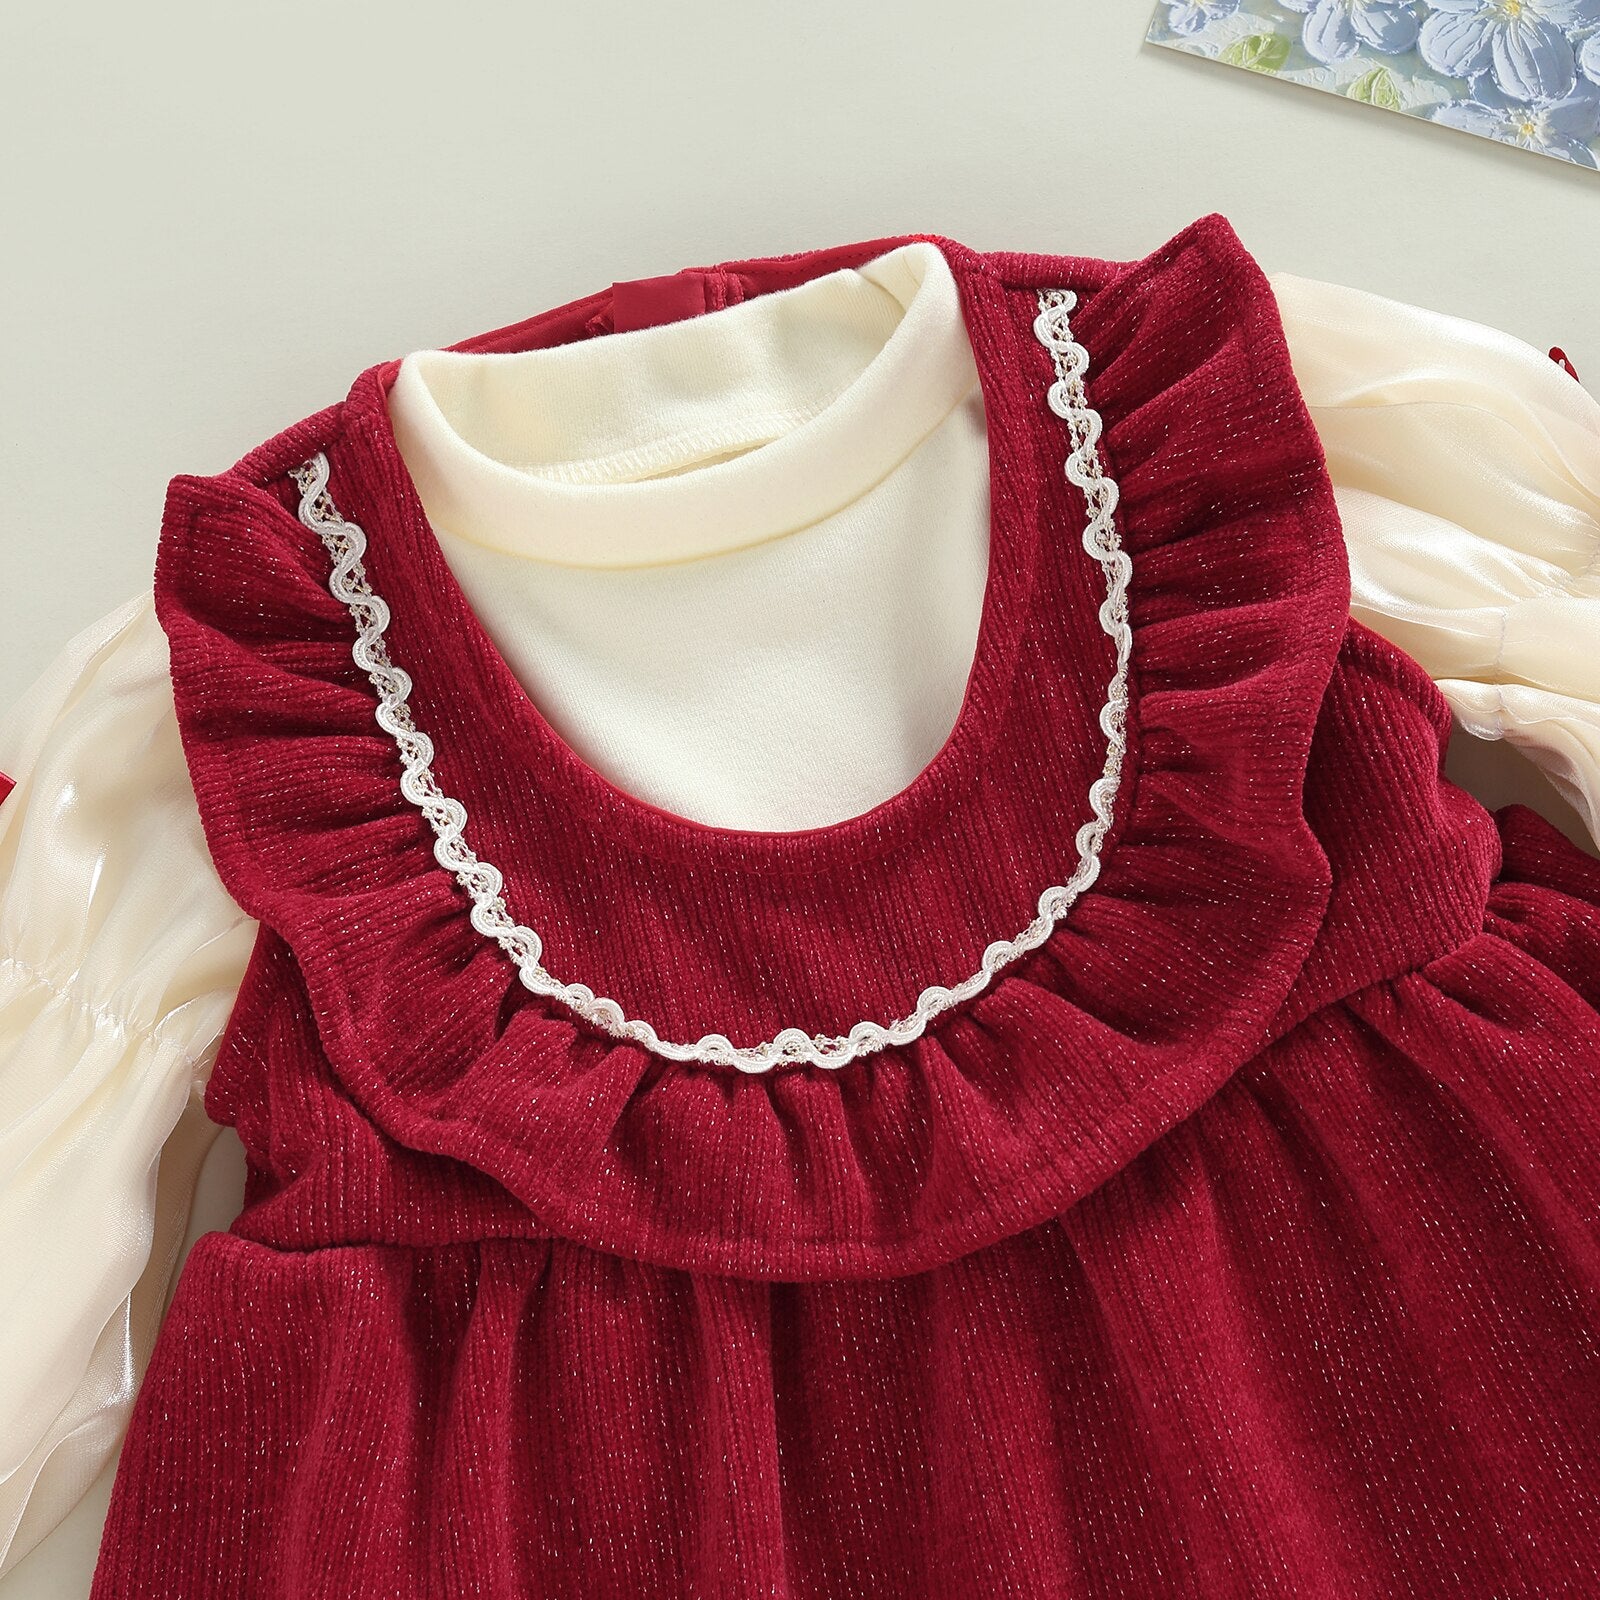 Bow Sleeve Top With Ruffle Collar Baby Dress